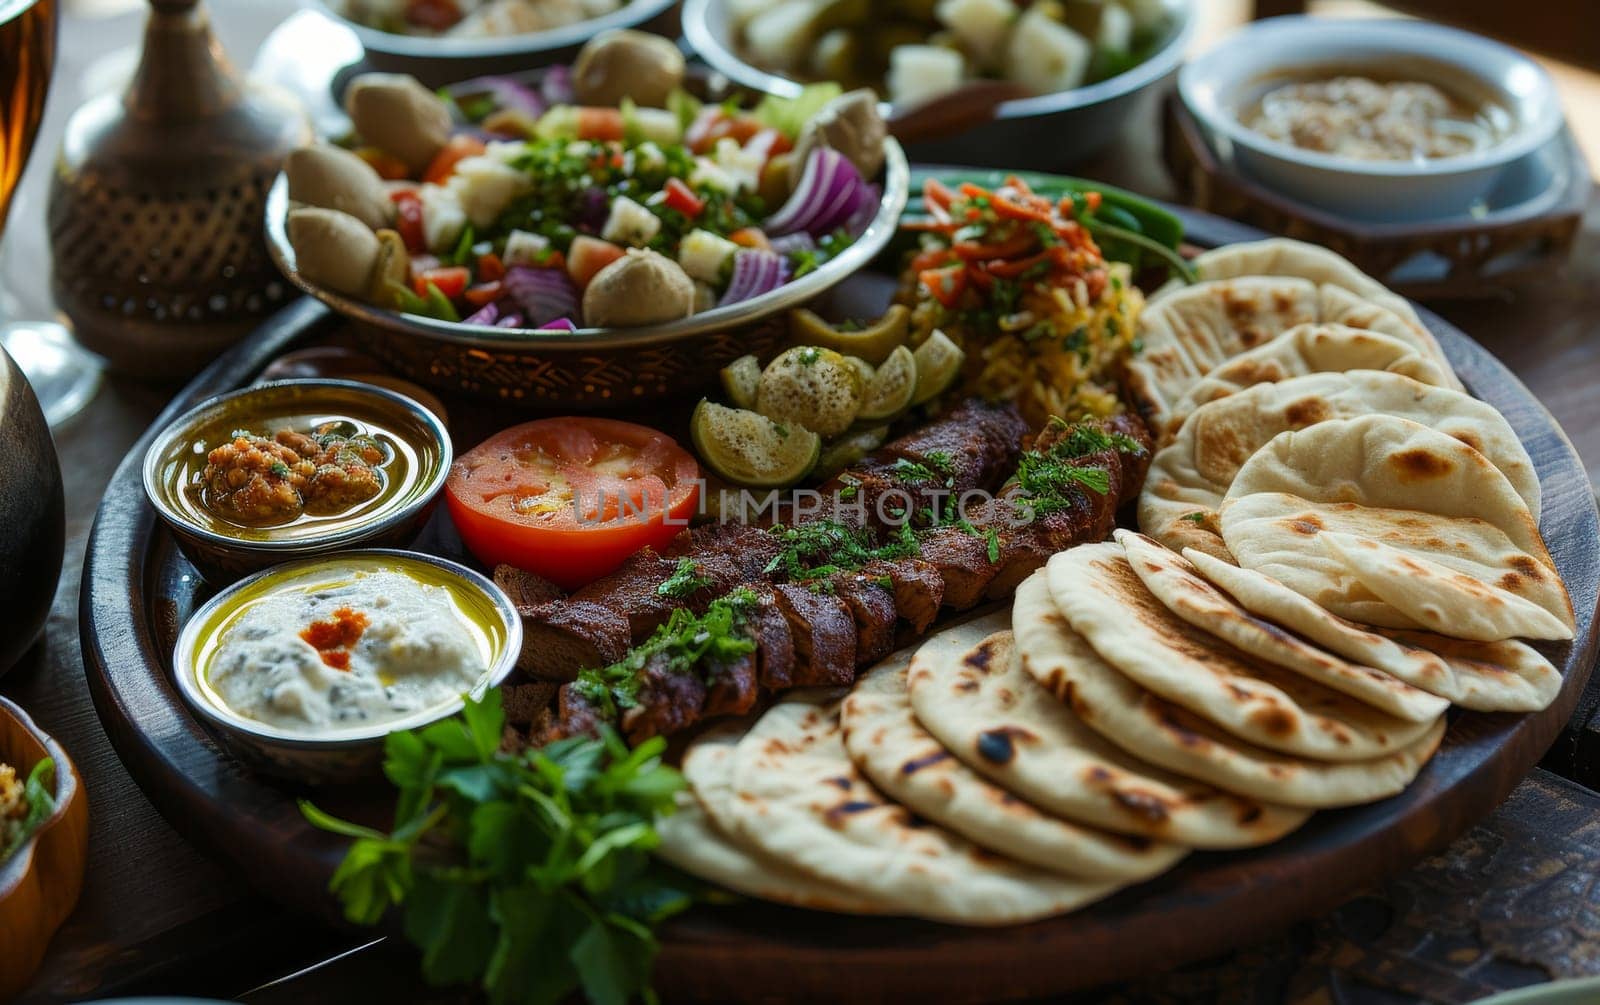 Richly decorated platter of Middle Eastern cuisine featuring kebabs, fresh salads, and an array of dips and bread